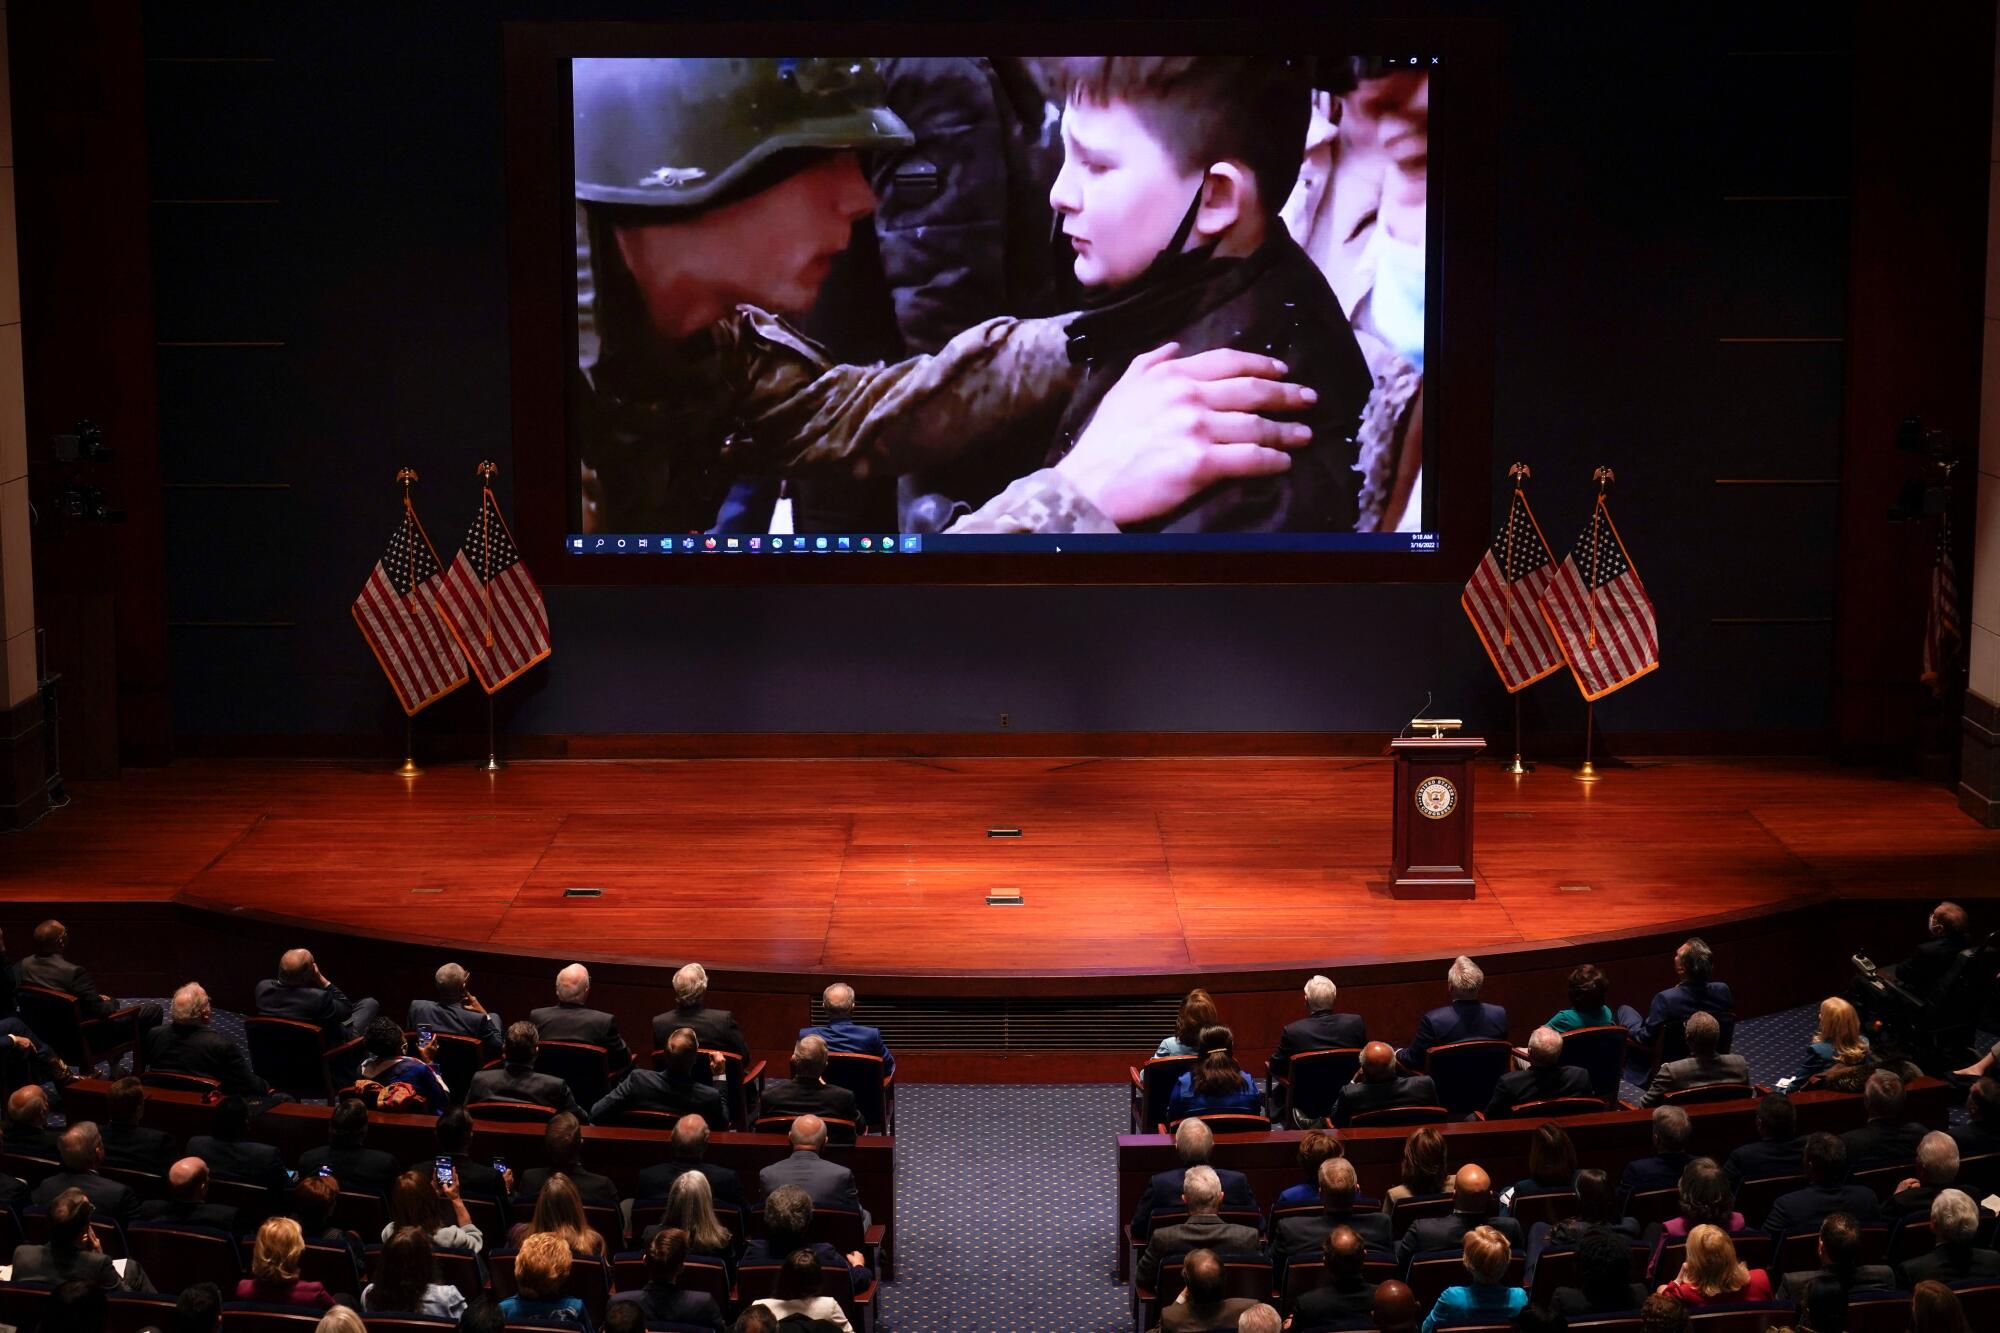 A screen shows a soldiers on a young boy's shoulders.